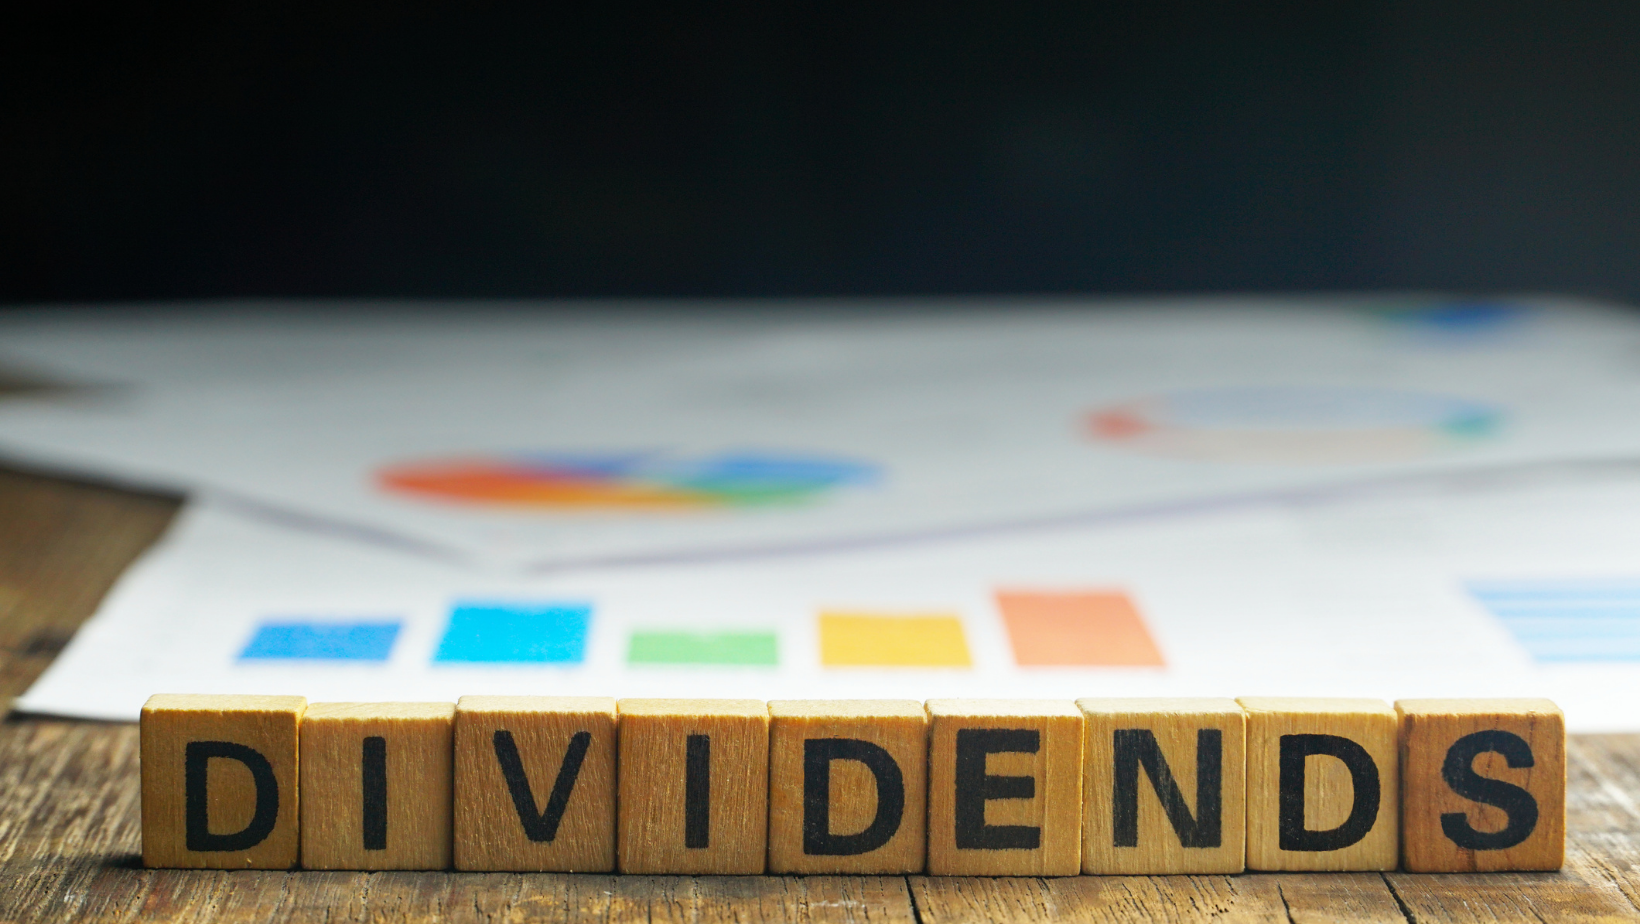 What are Dividends